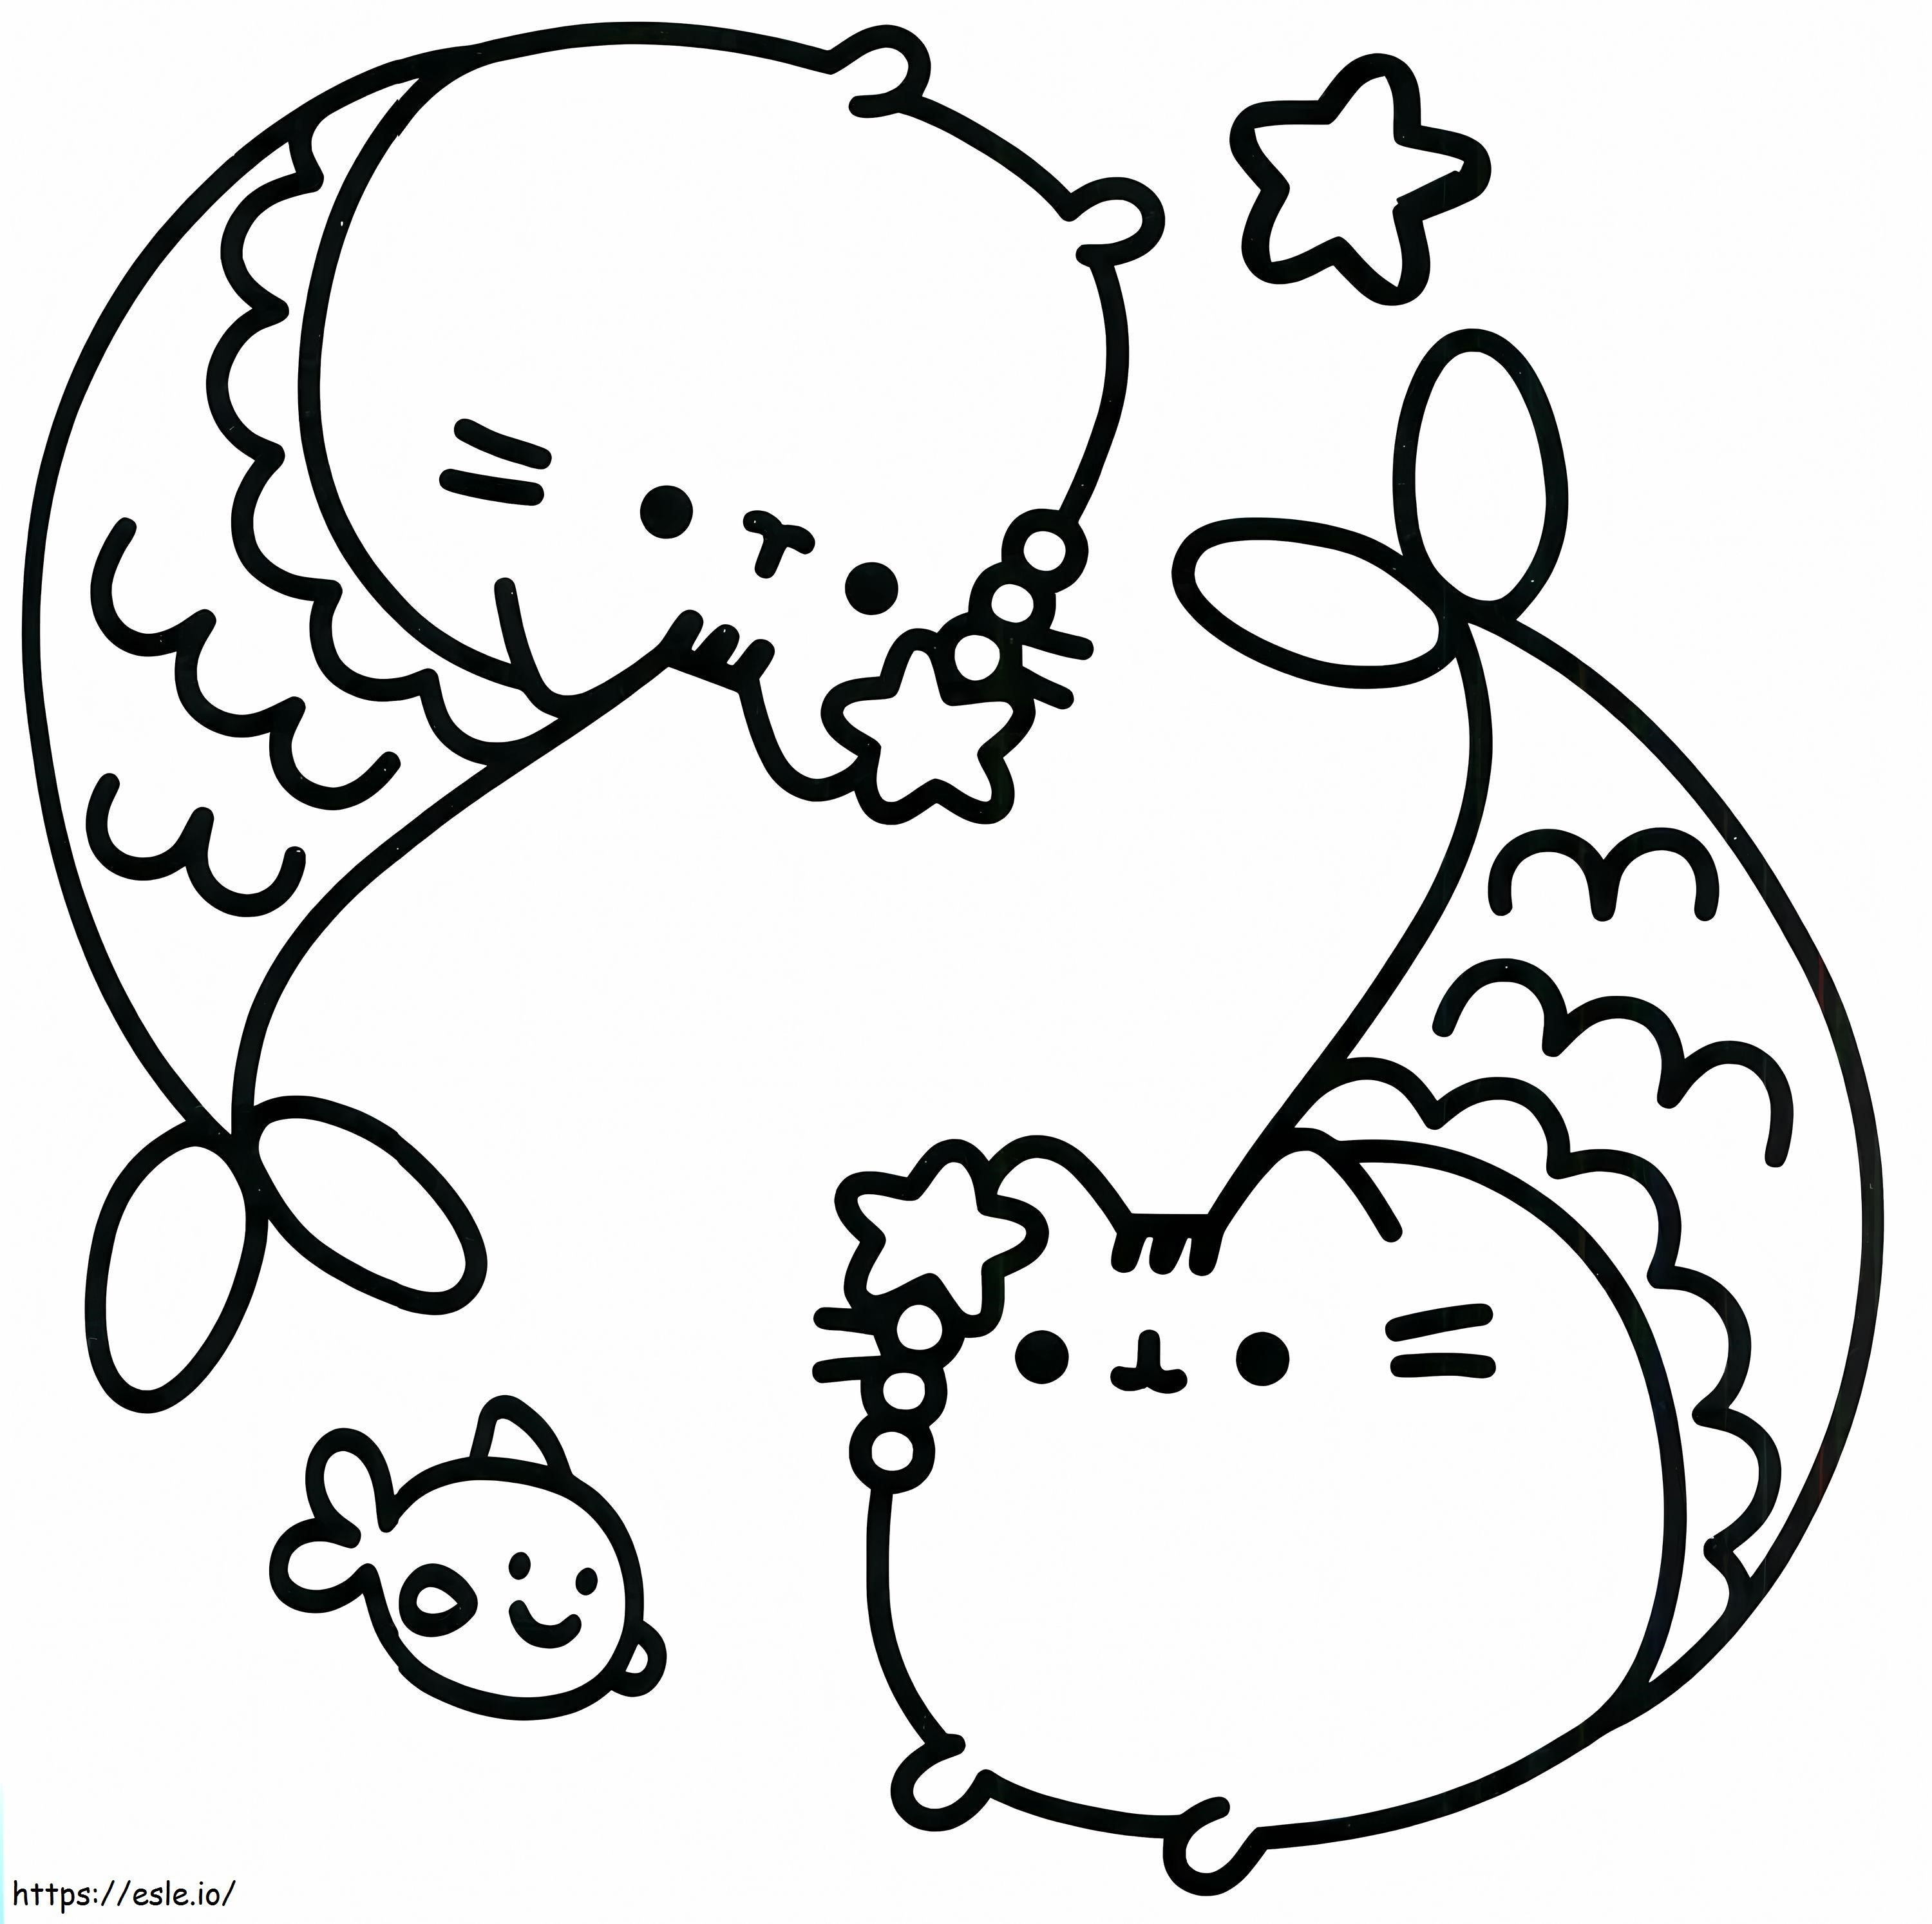 Two Mermaid Pusheen And Starfish coloring page